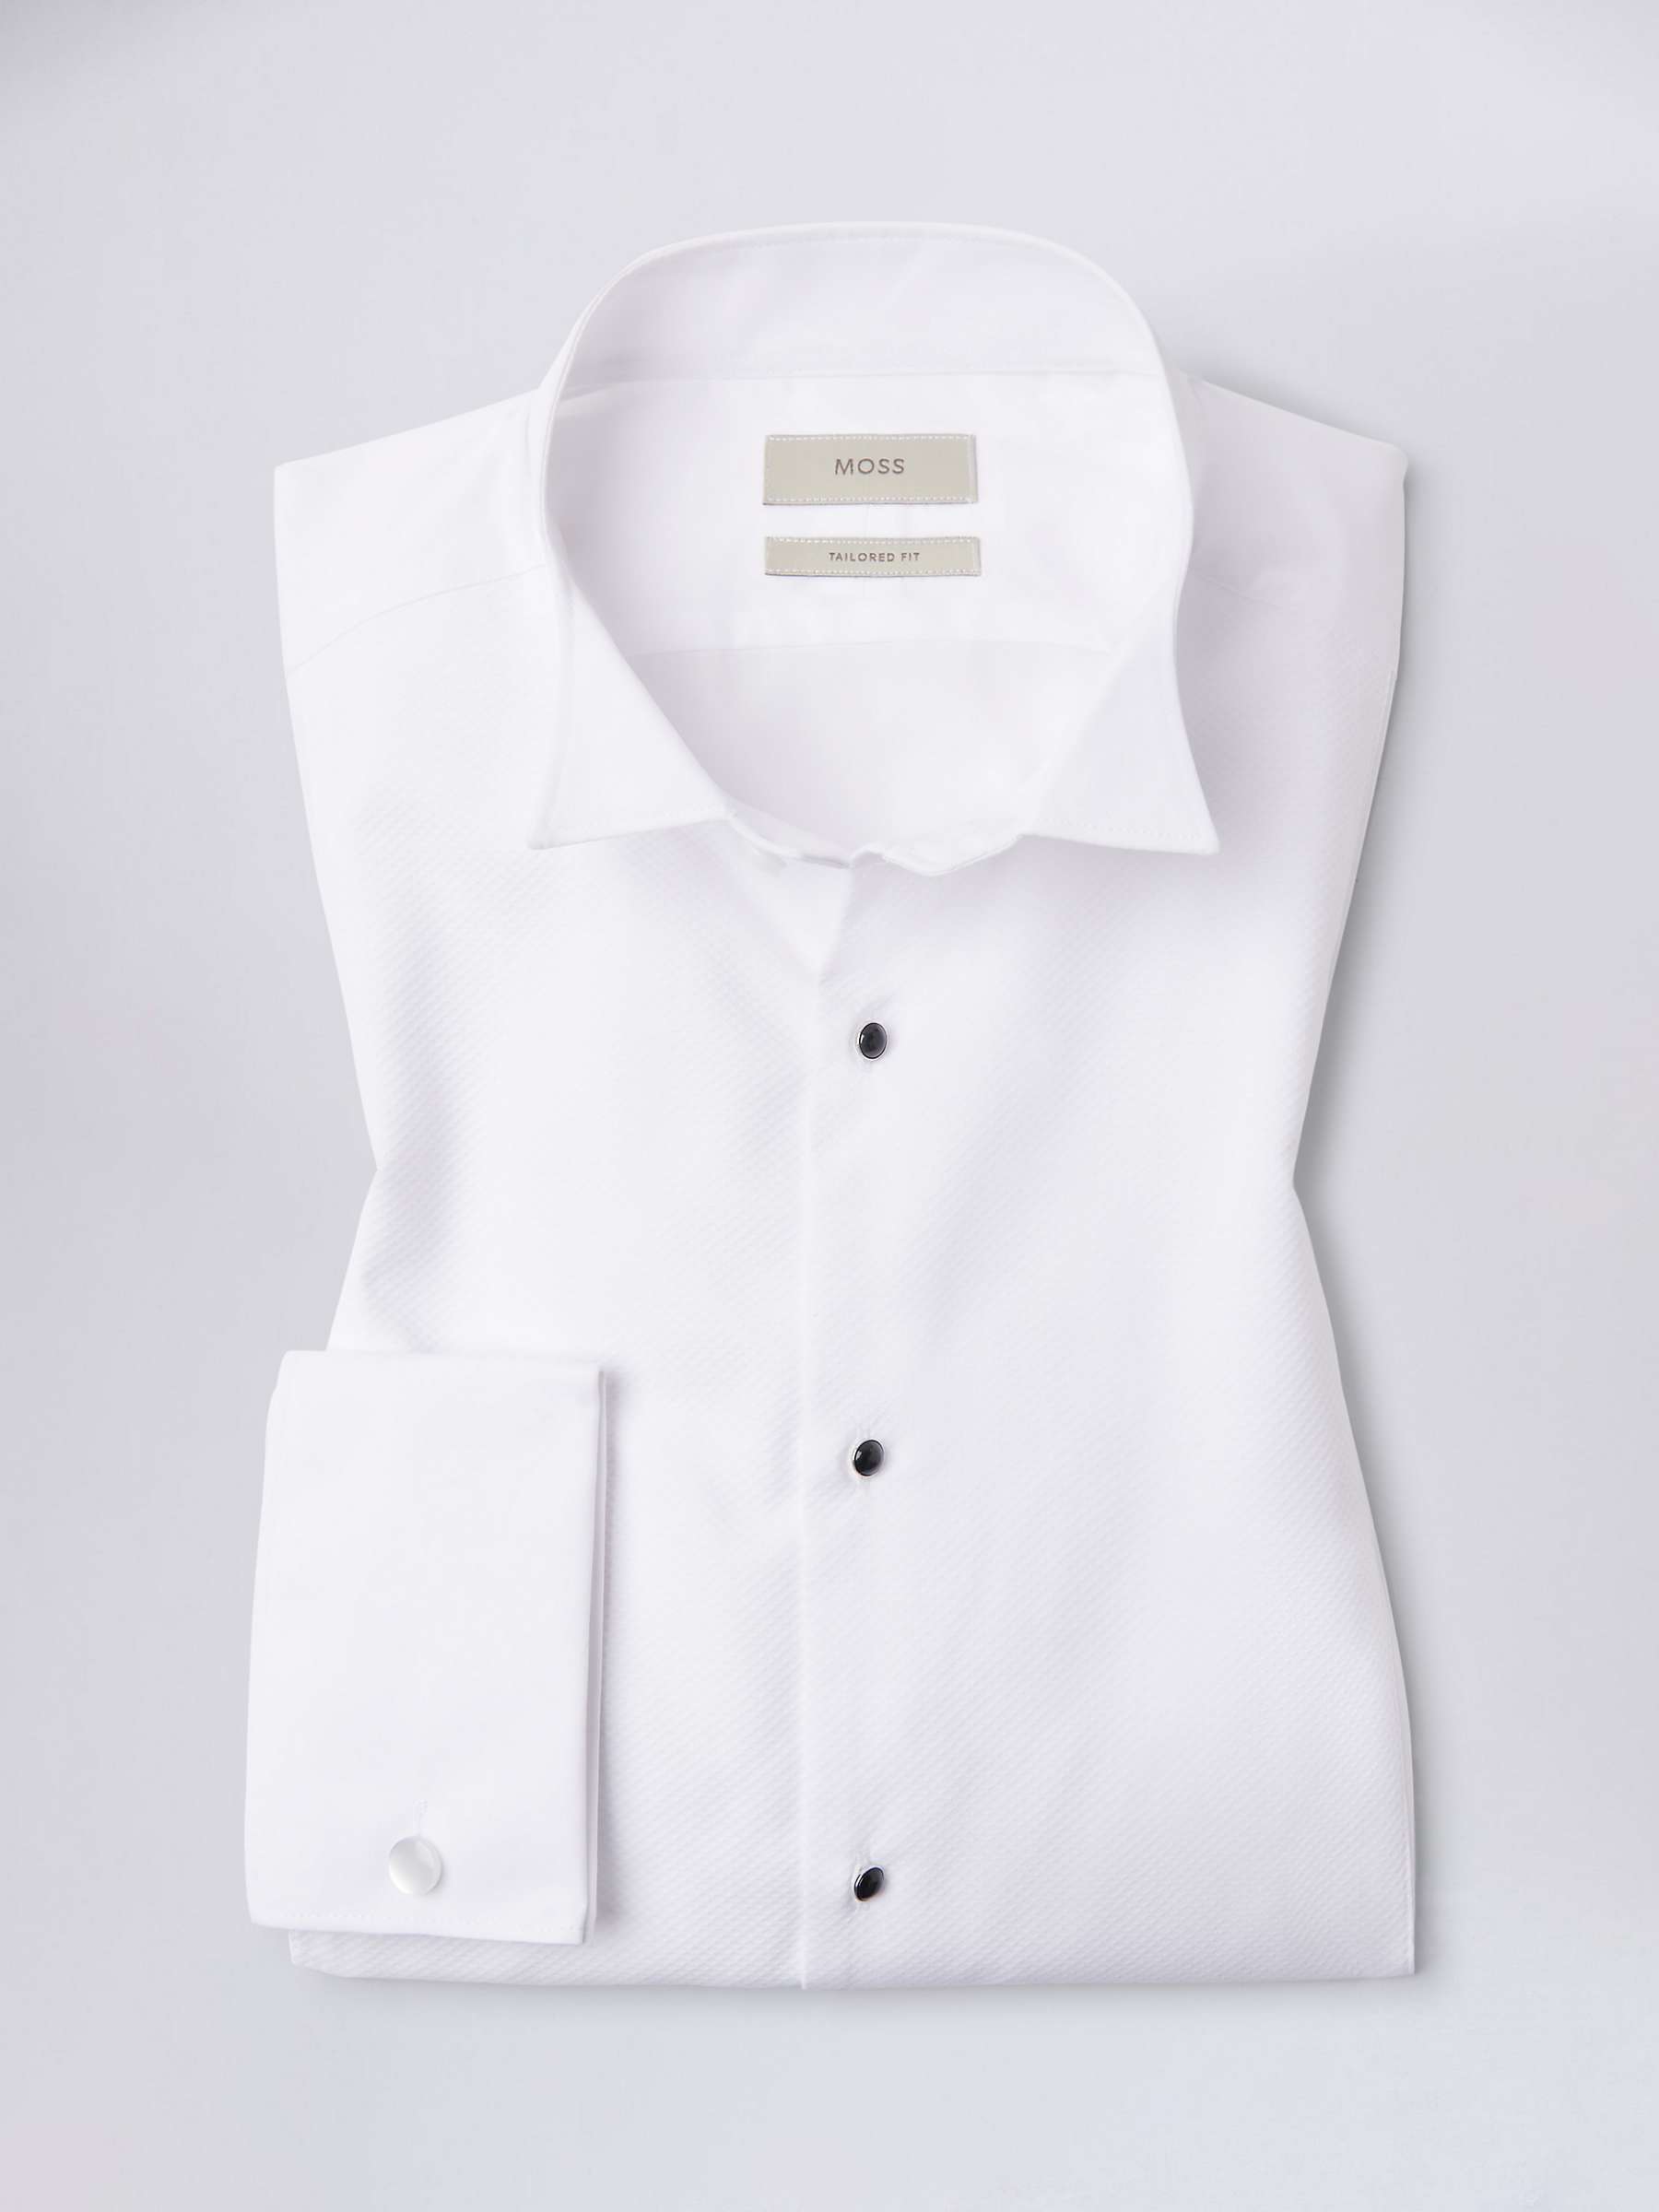 Buy Moss Tailored Marcella Wing Collar Dress Shirt, White Online at johnlewis.com